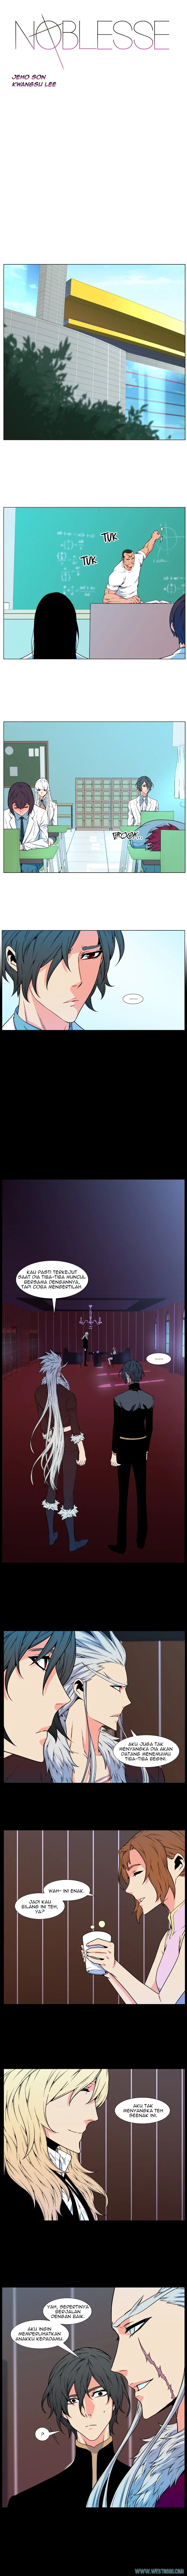 Noblesse Chapter 479 - 49